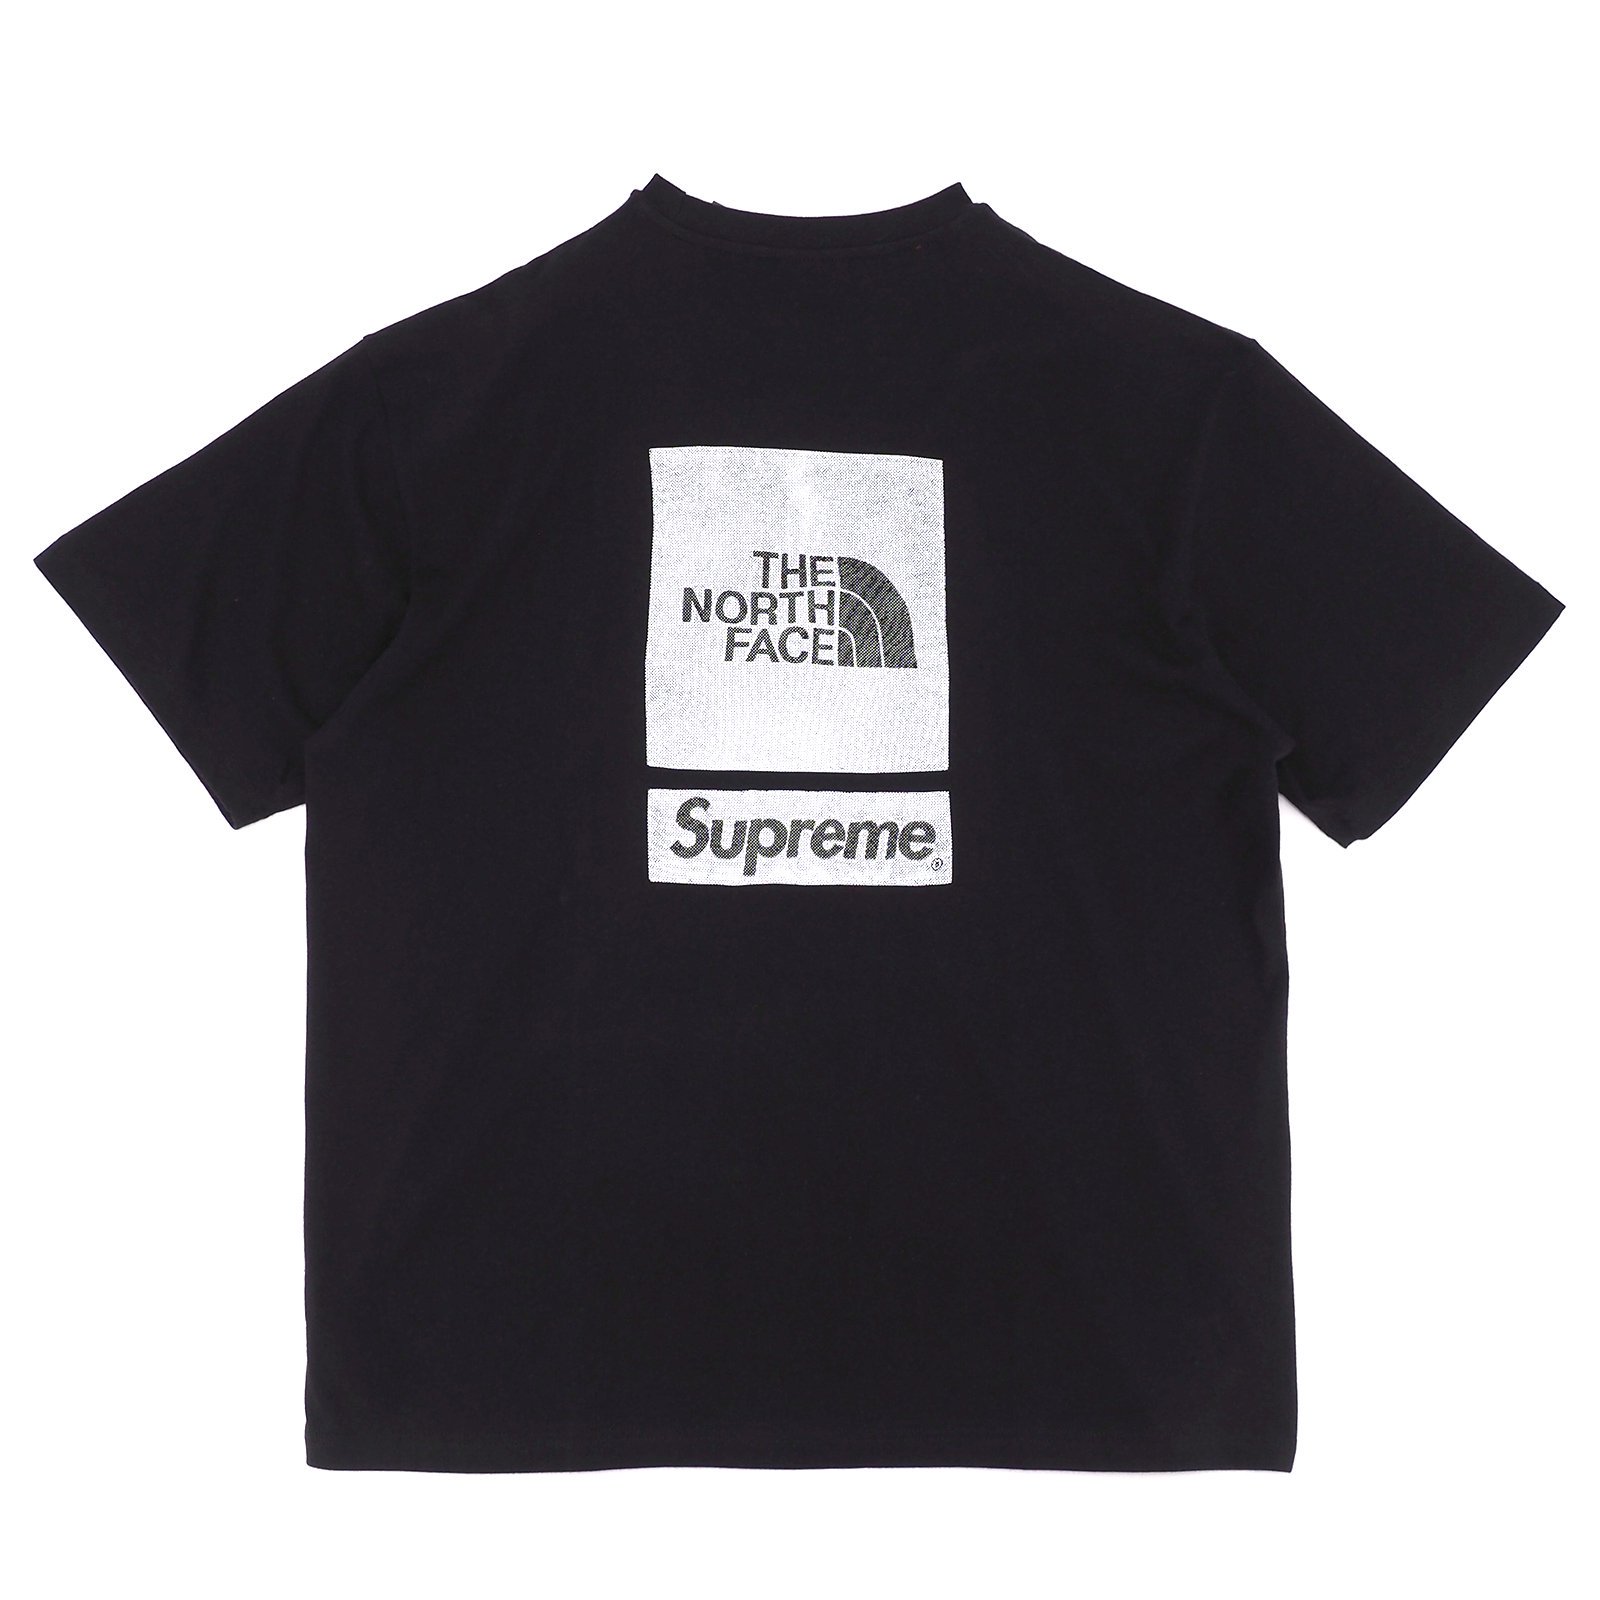 Supreme x The North Face Top \